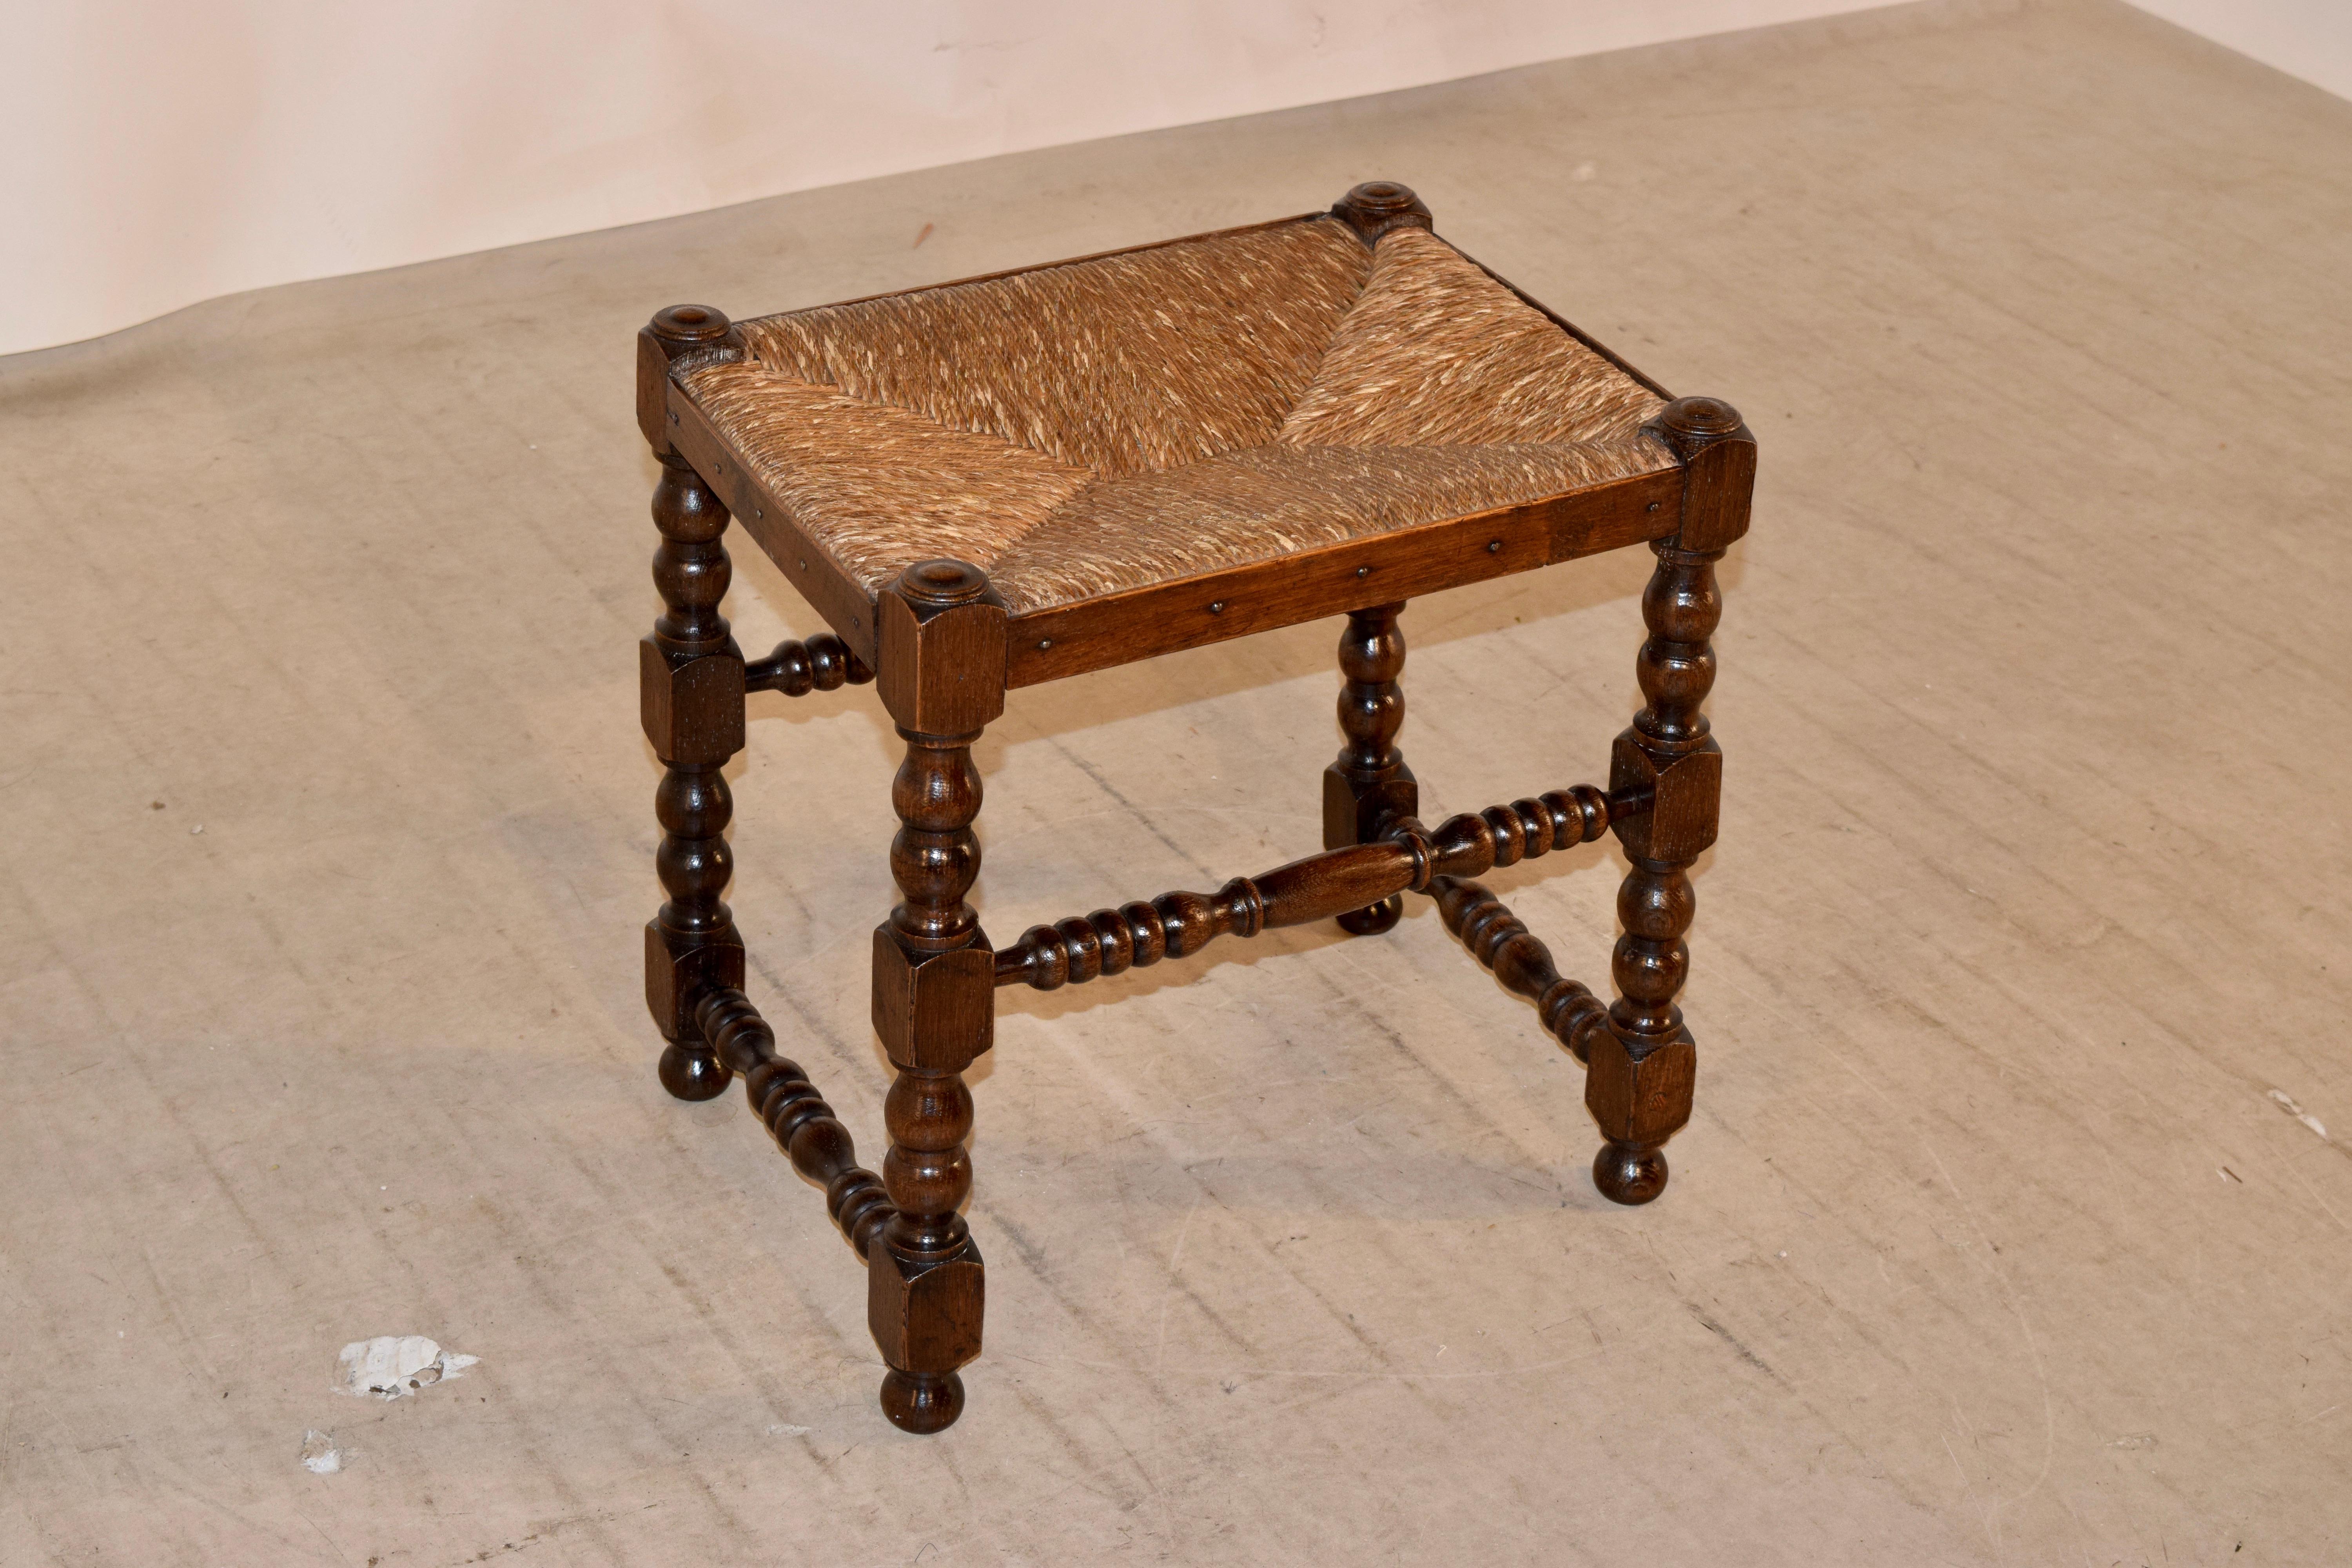 18th century oak stool from England with wonderfully hand-turned legs and matching stretchers with what appears to be its original rush seat.